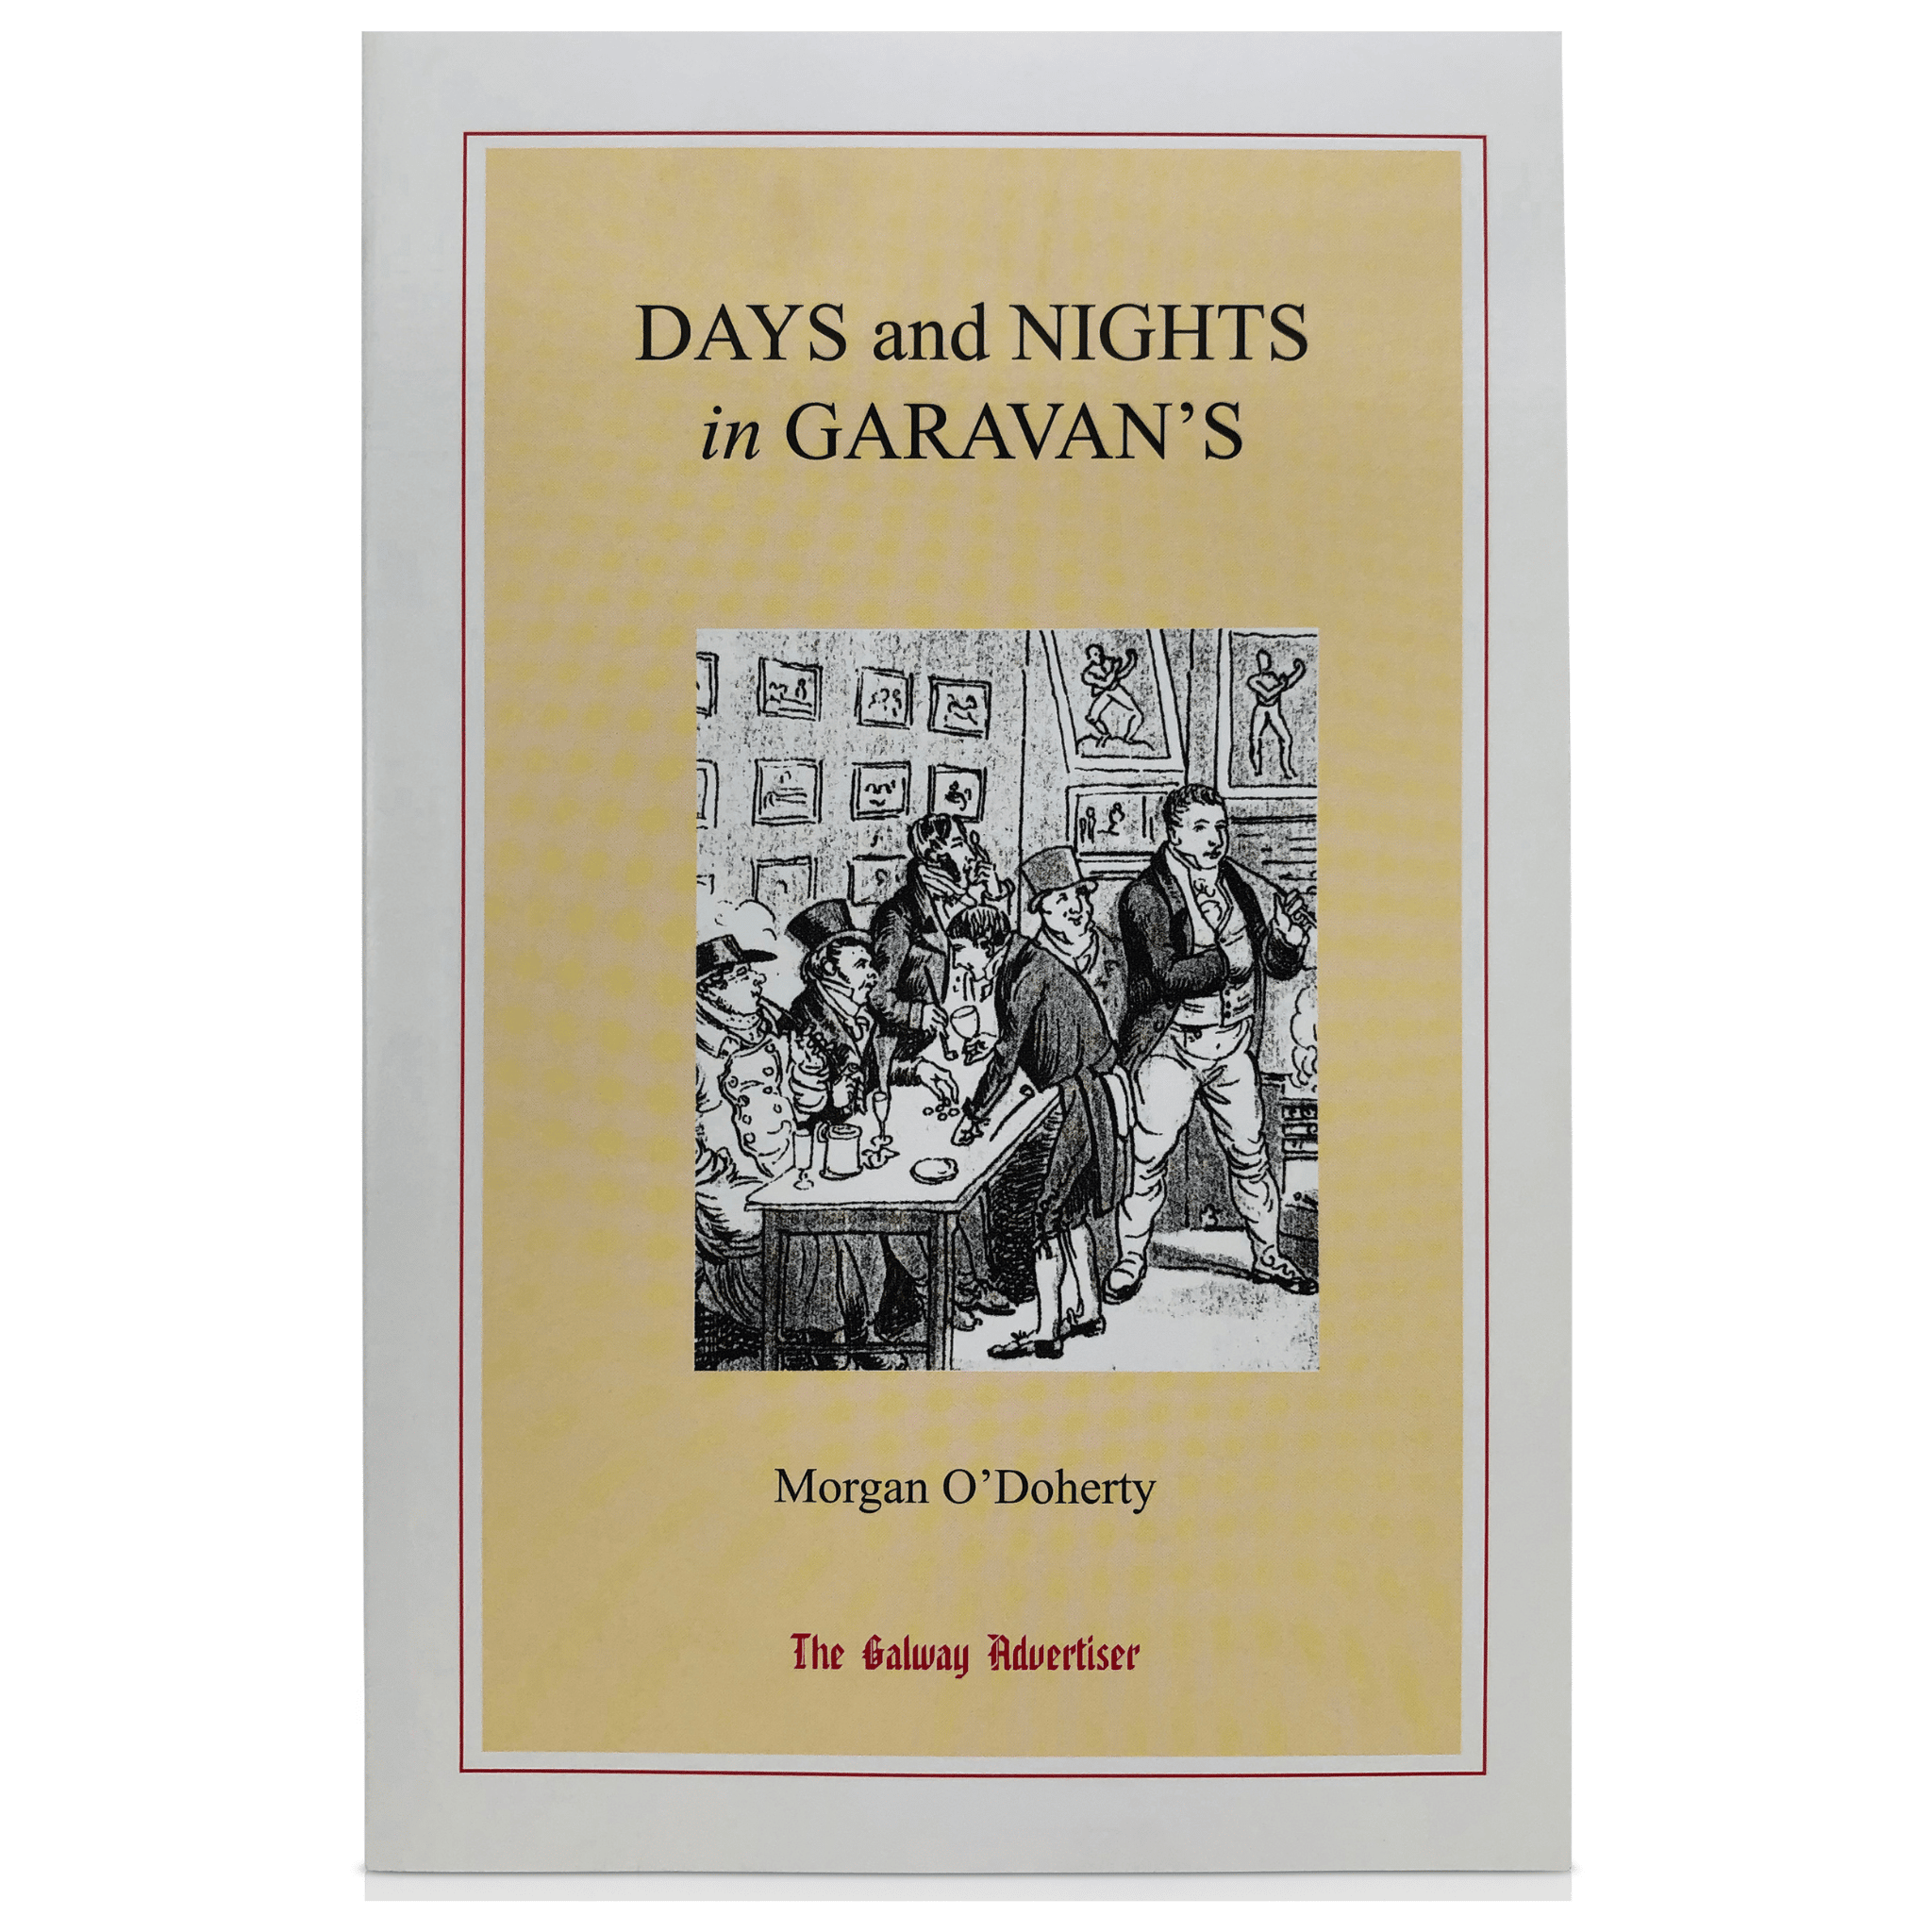 Morgan O'Doherty's 'Days and Nights in Garavan's': Captivating Collection of Short Stories Set in Iconic Irish Whiskey Bar - Perfect Gift for Story Enthusiasts